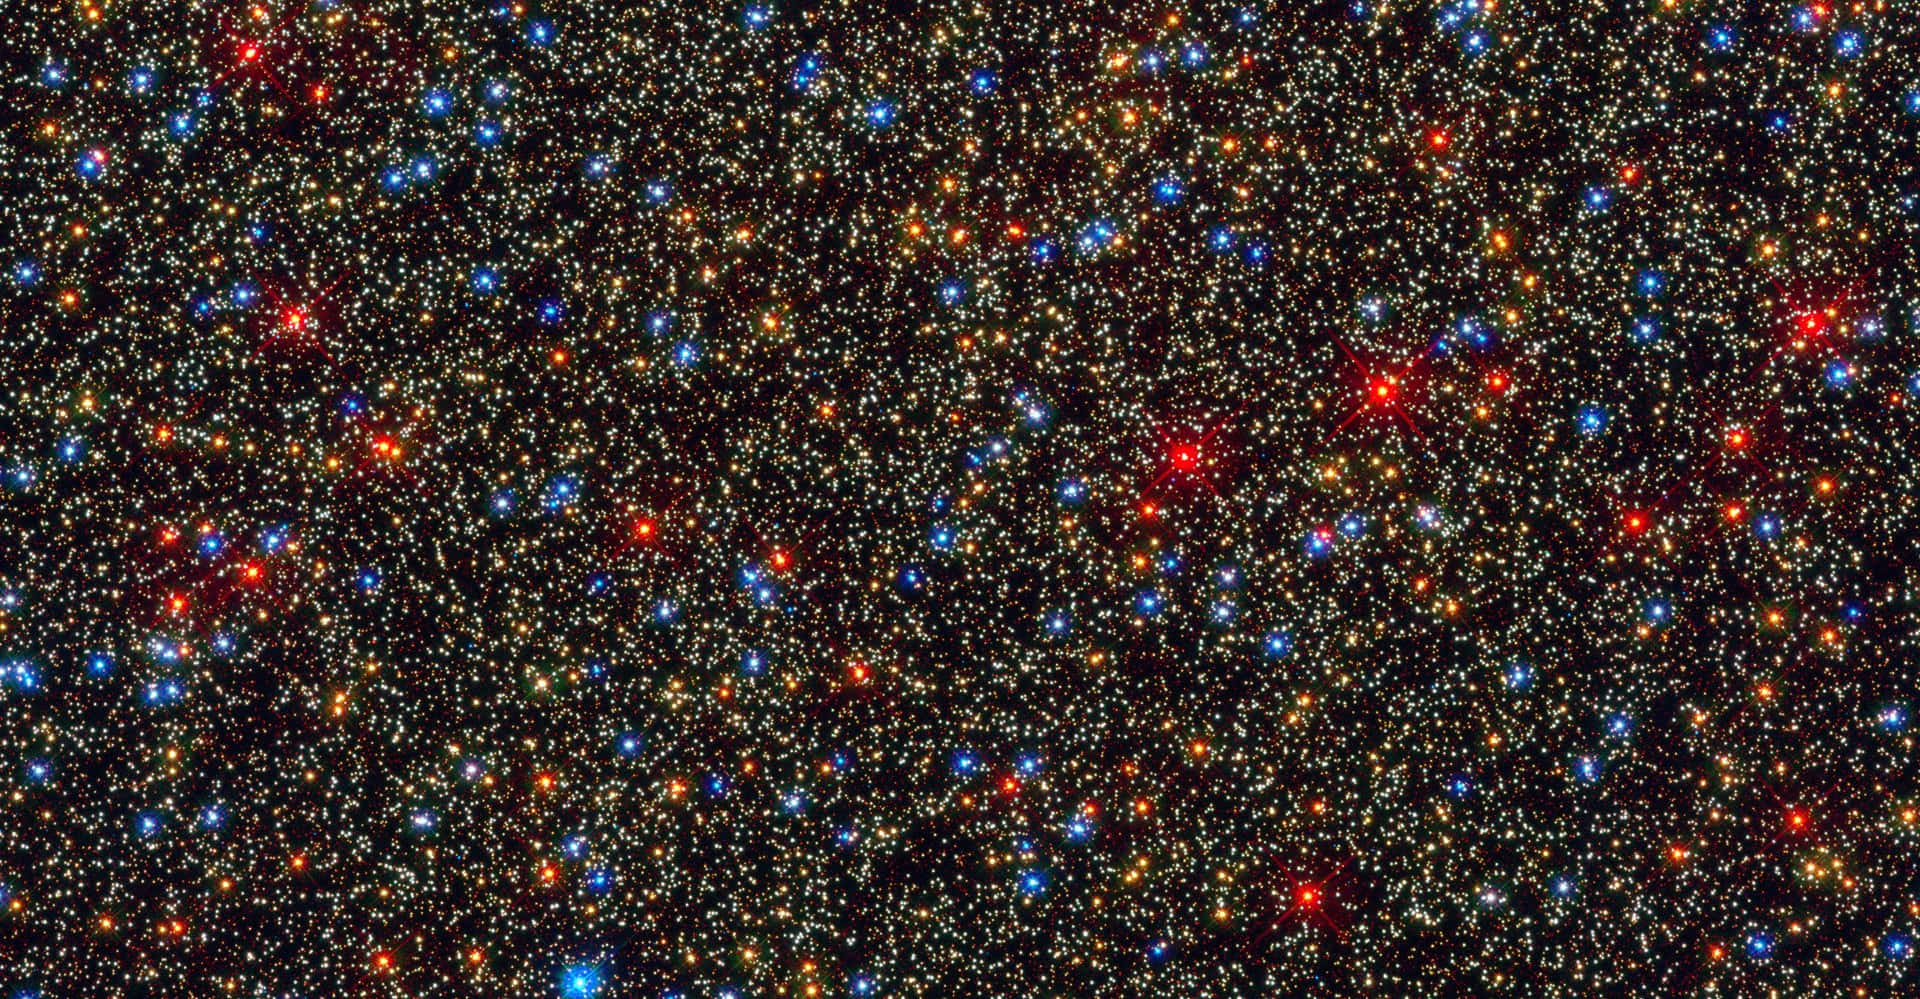 Captivating Star Cluster in the Cosmos Wallpaper